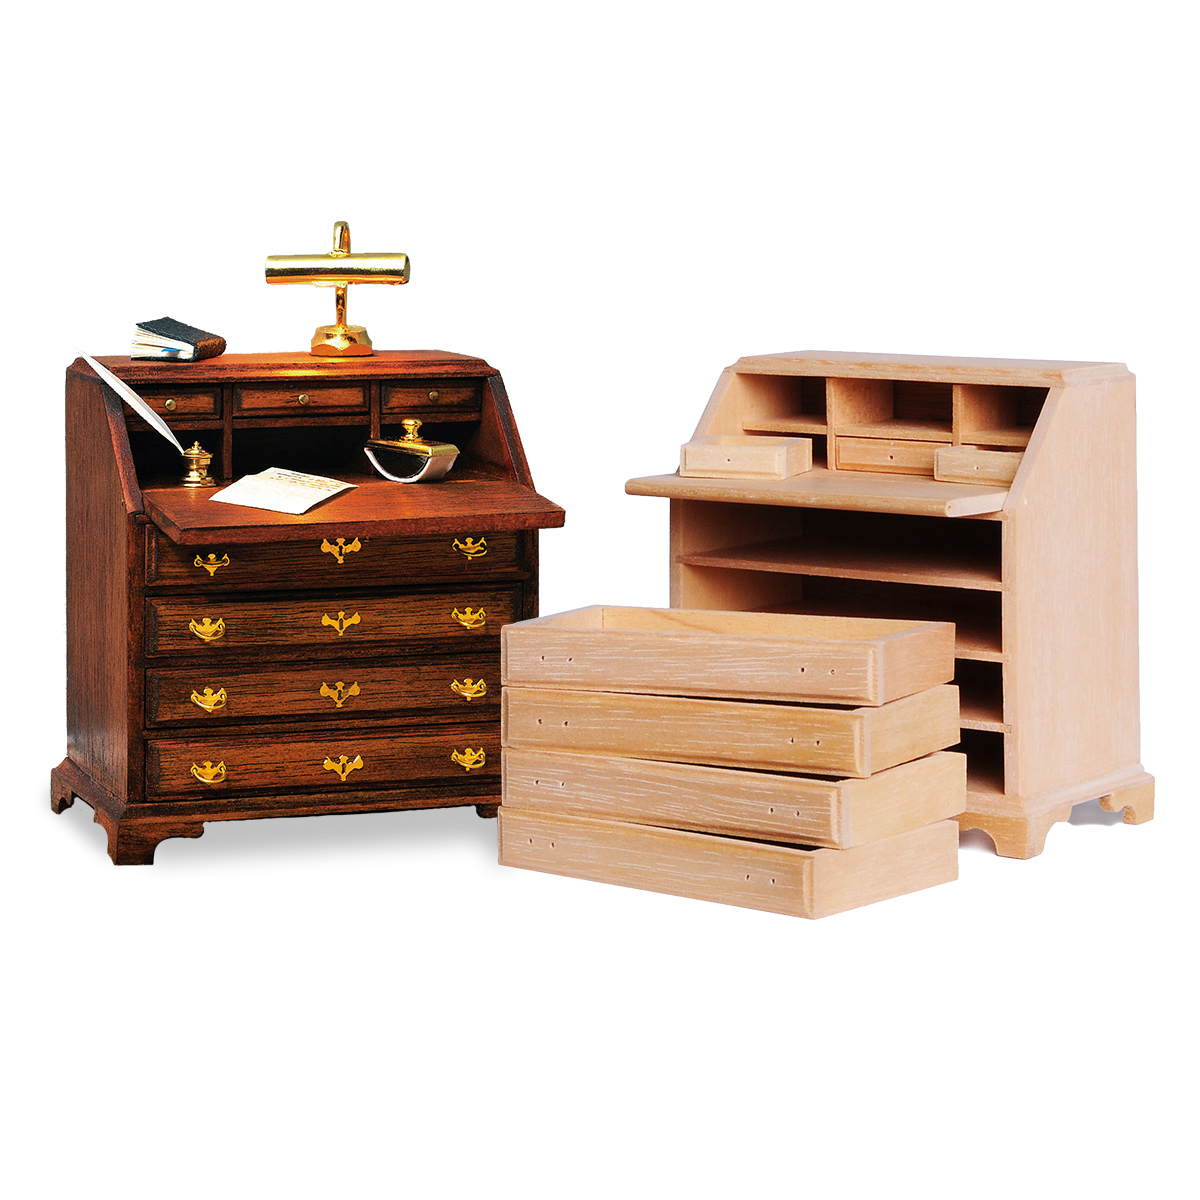 Chippendale writing desk